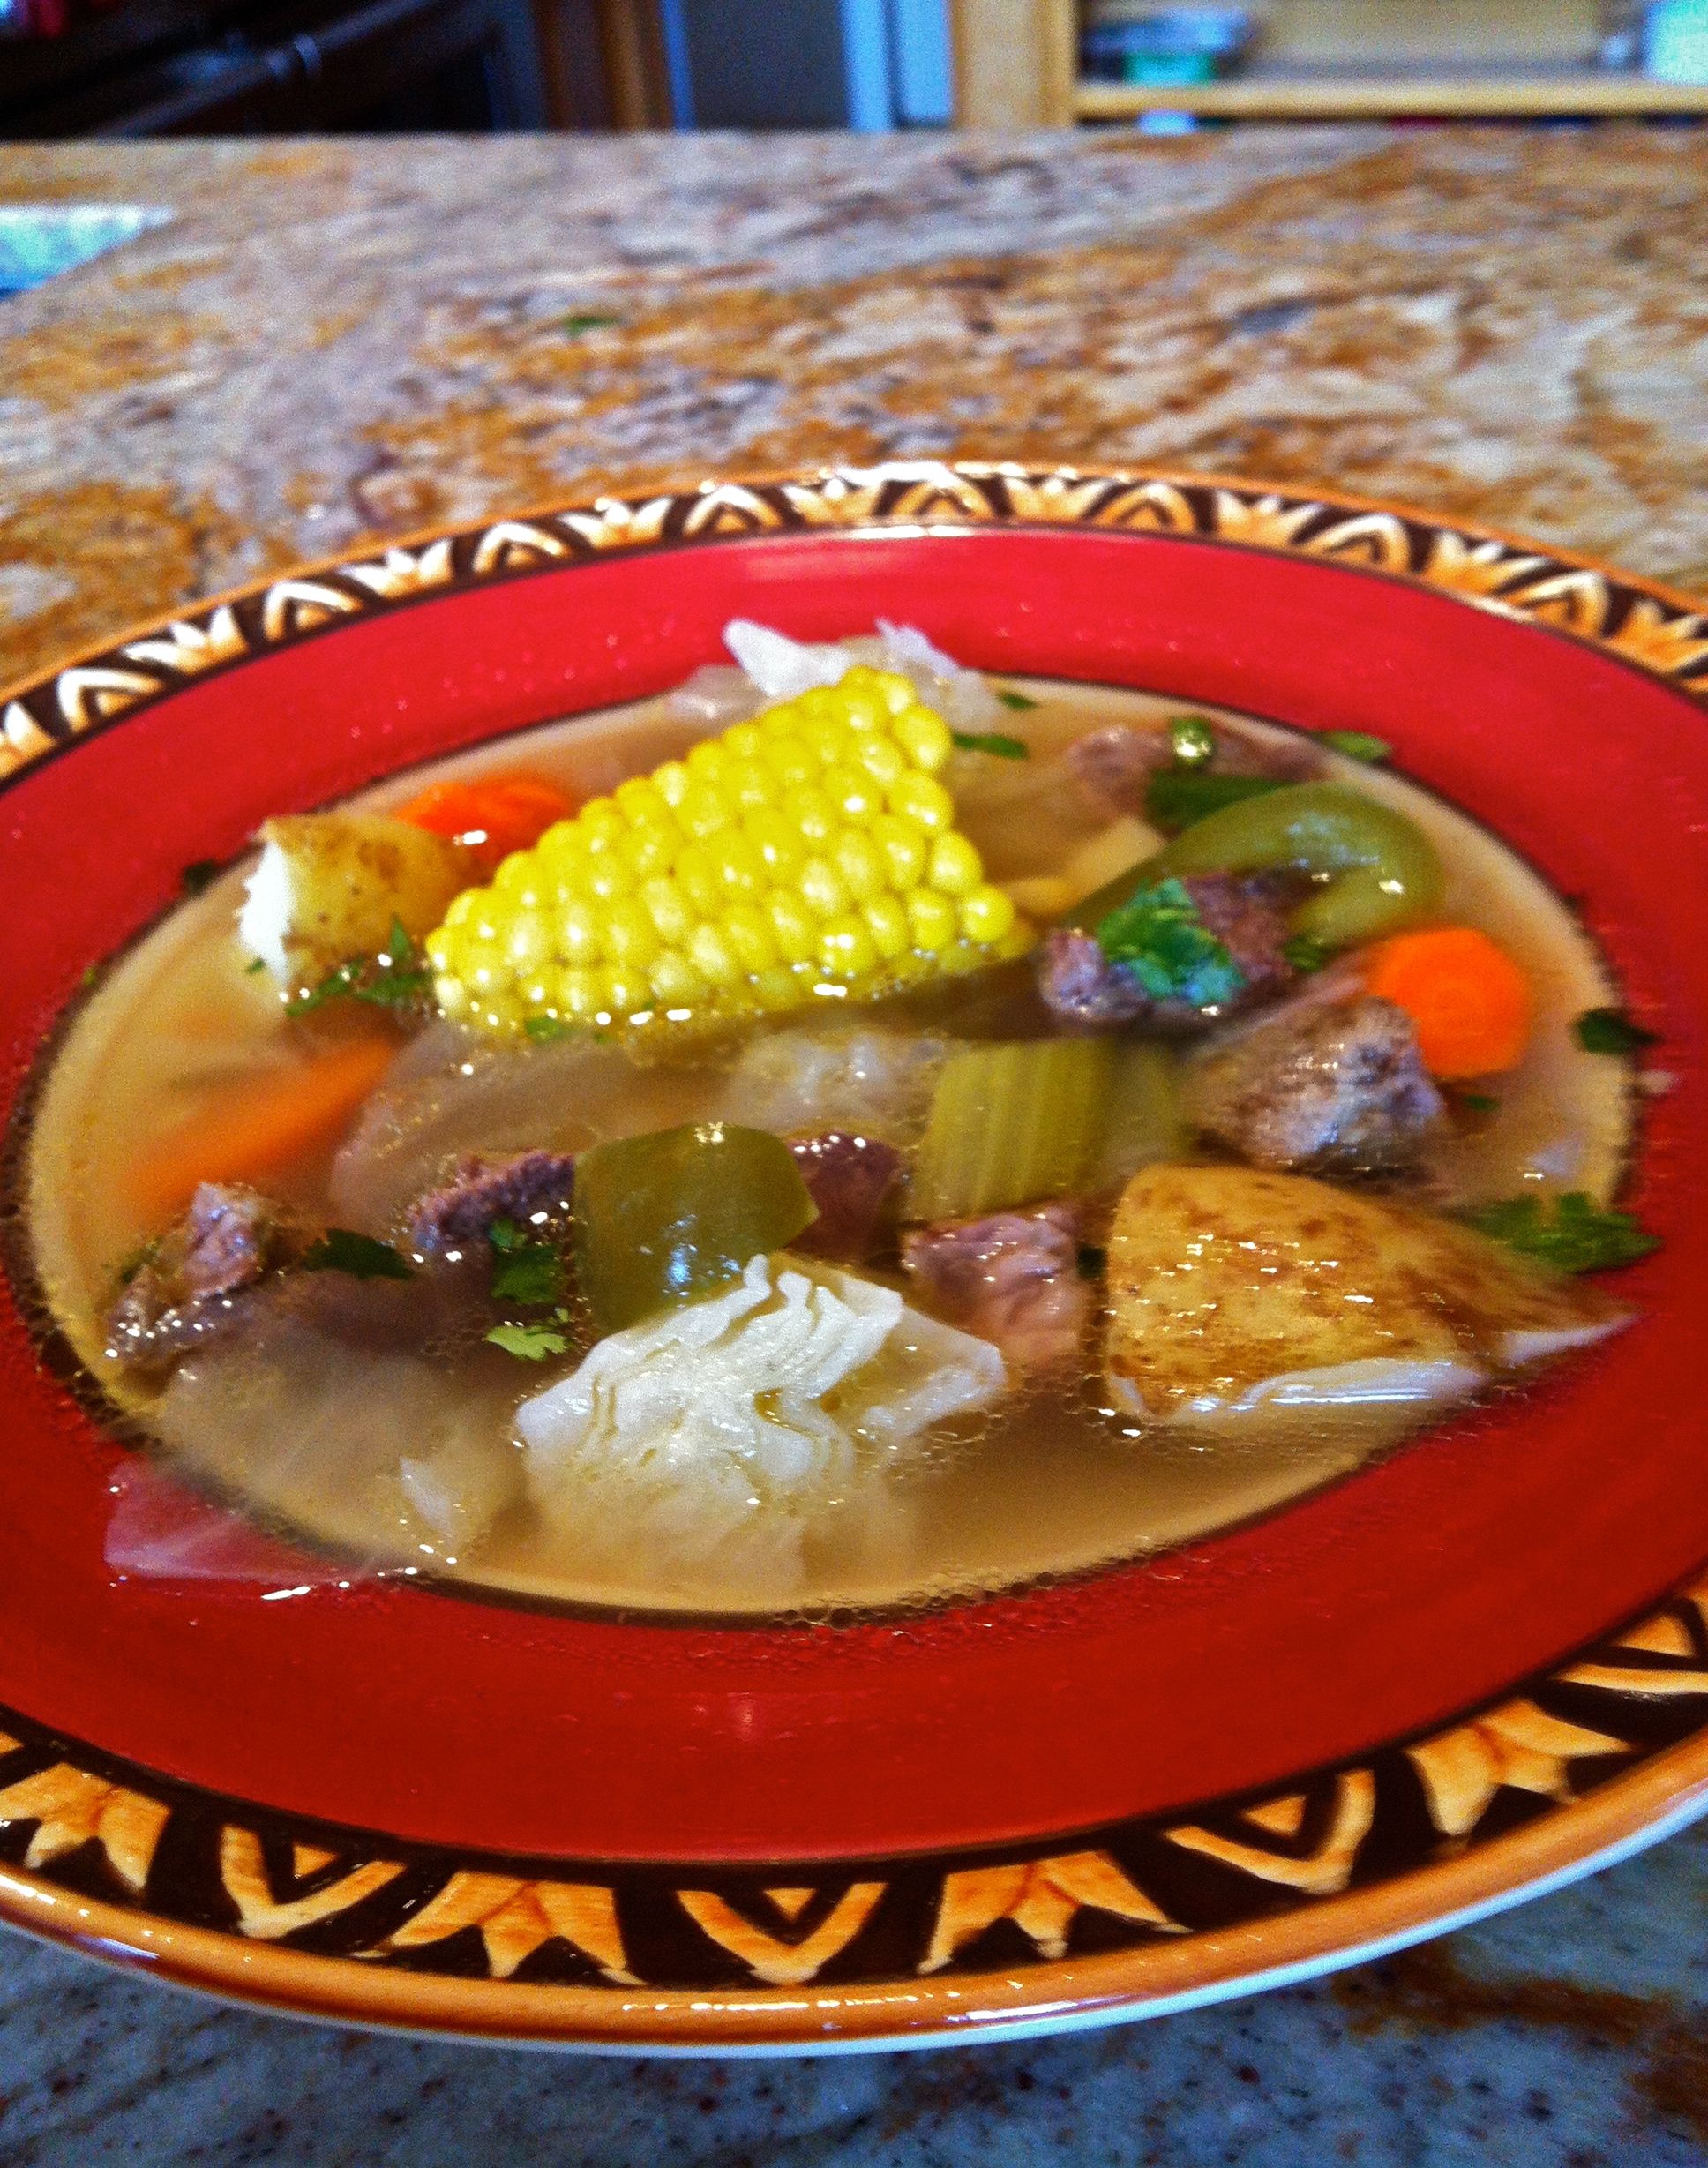 Caldo de res, the traditional Mexican beef soup that comforts on a chilly day